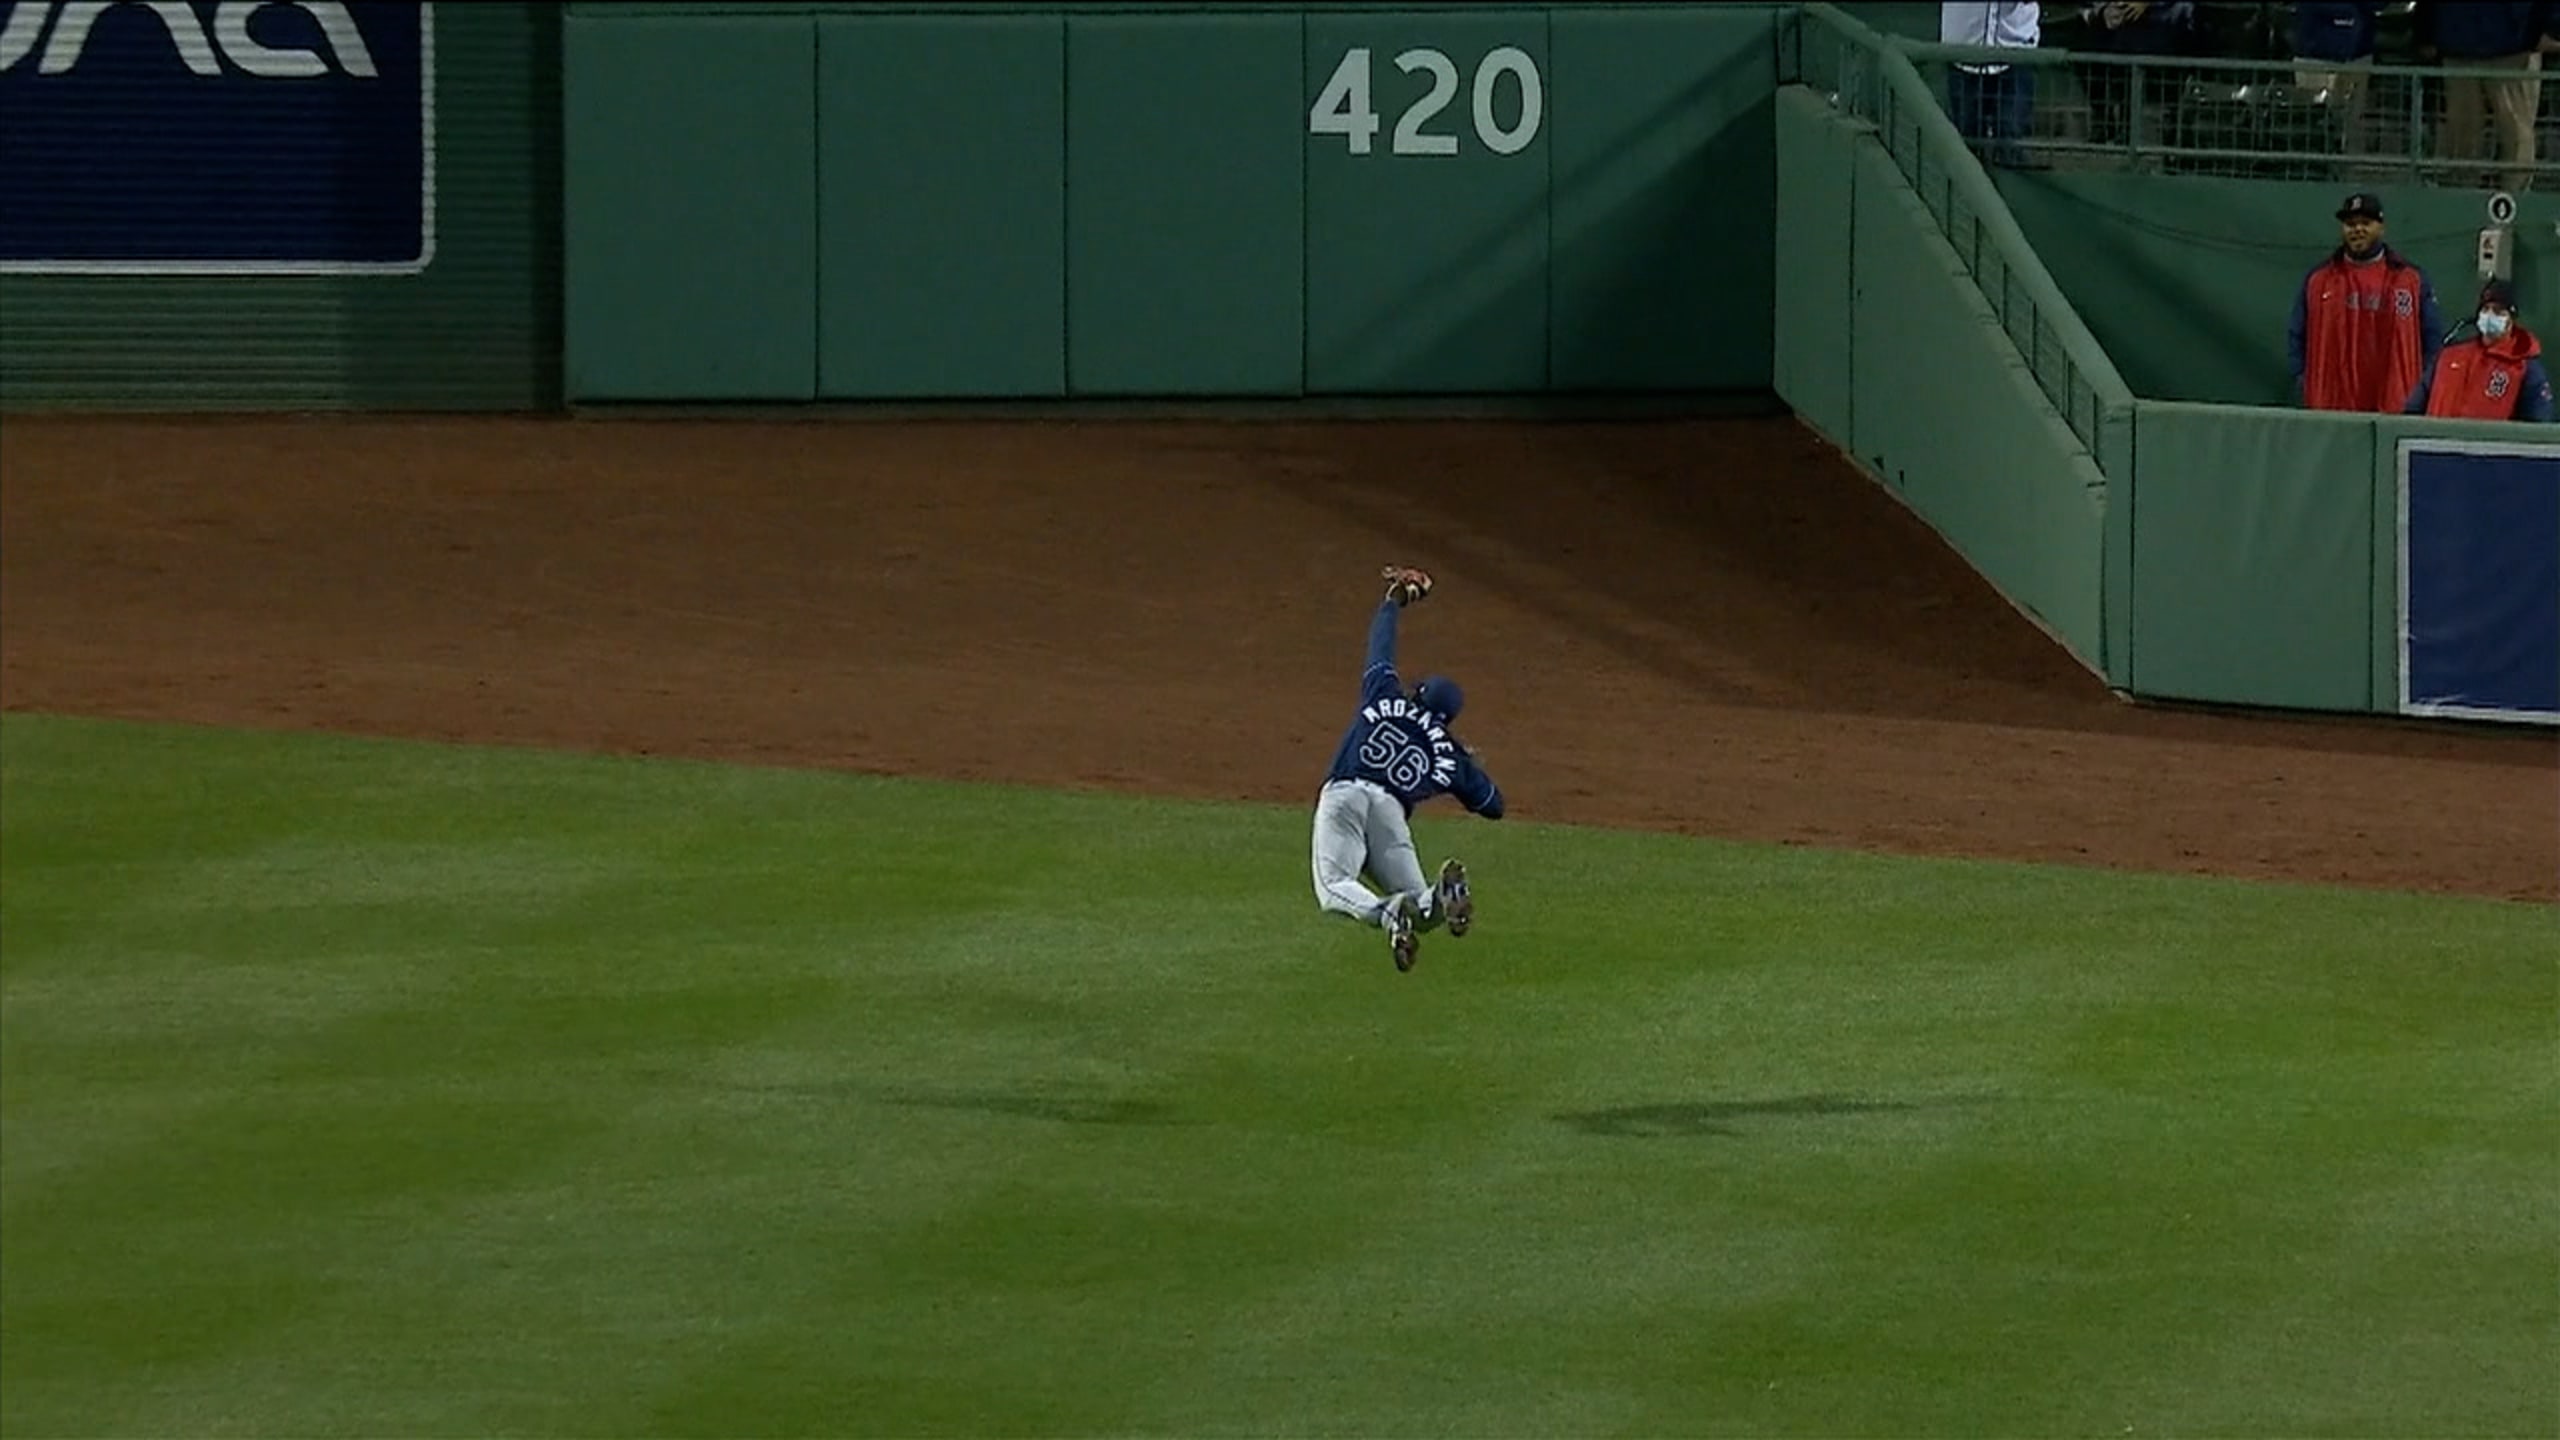 Arozarena's Diving Catch Named Play of The Week